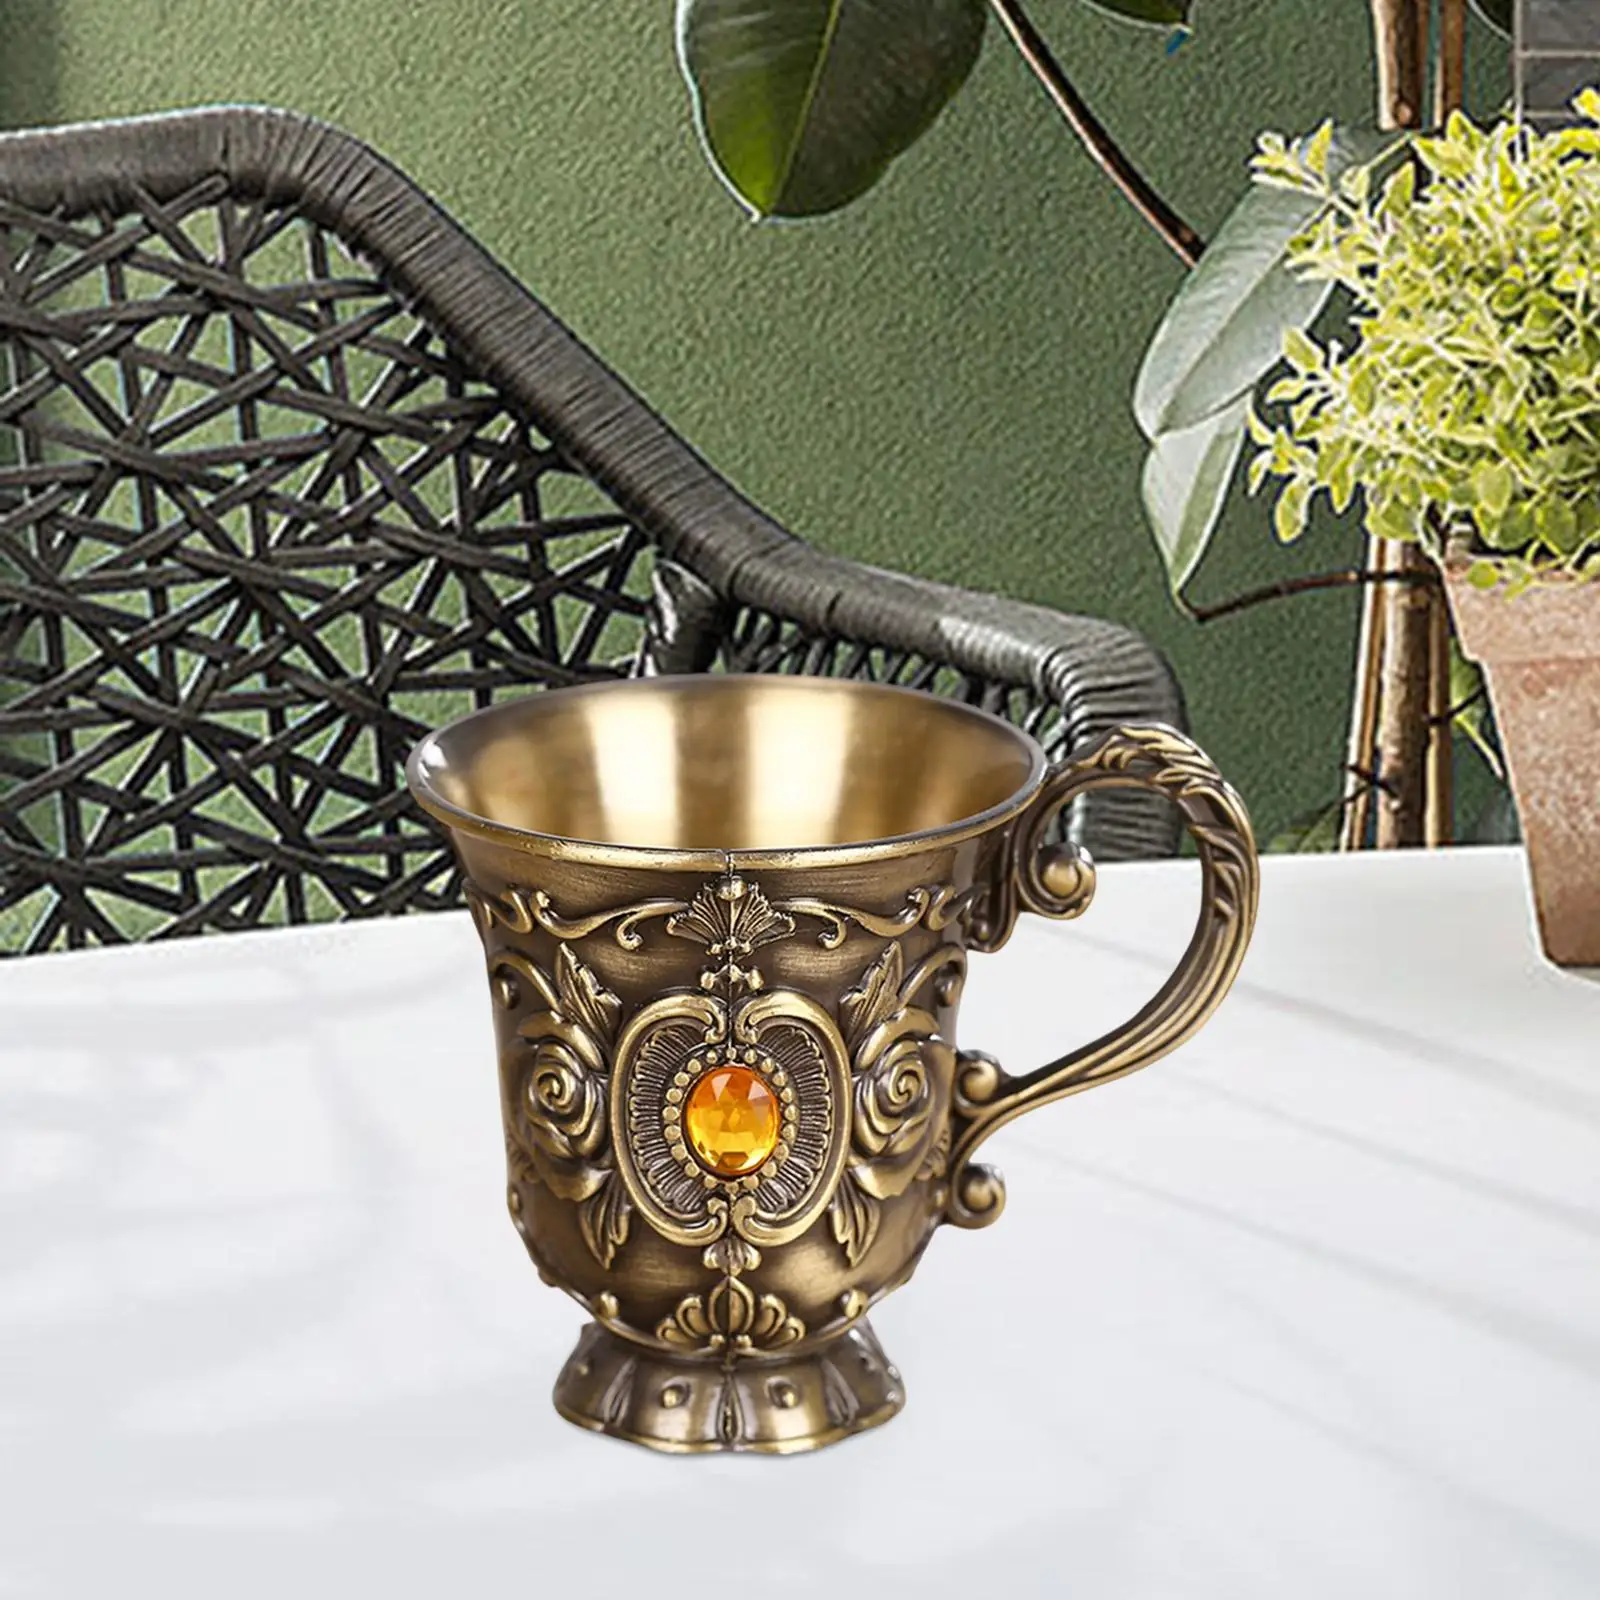 Zinc Alloy Drink Cup Decoration Collectible Portable Gifts Embossed Retro Teacups for Party KTV Side Table Living Room